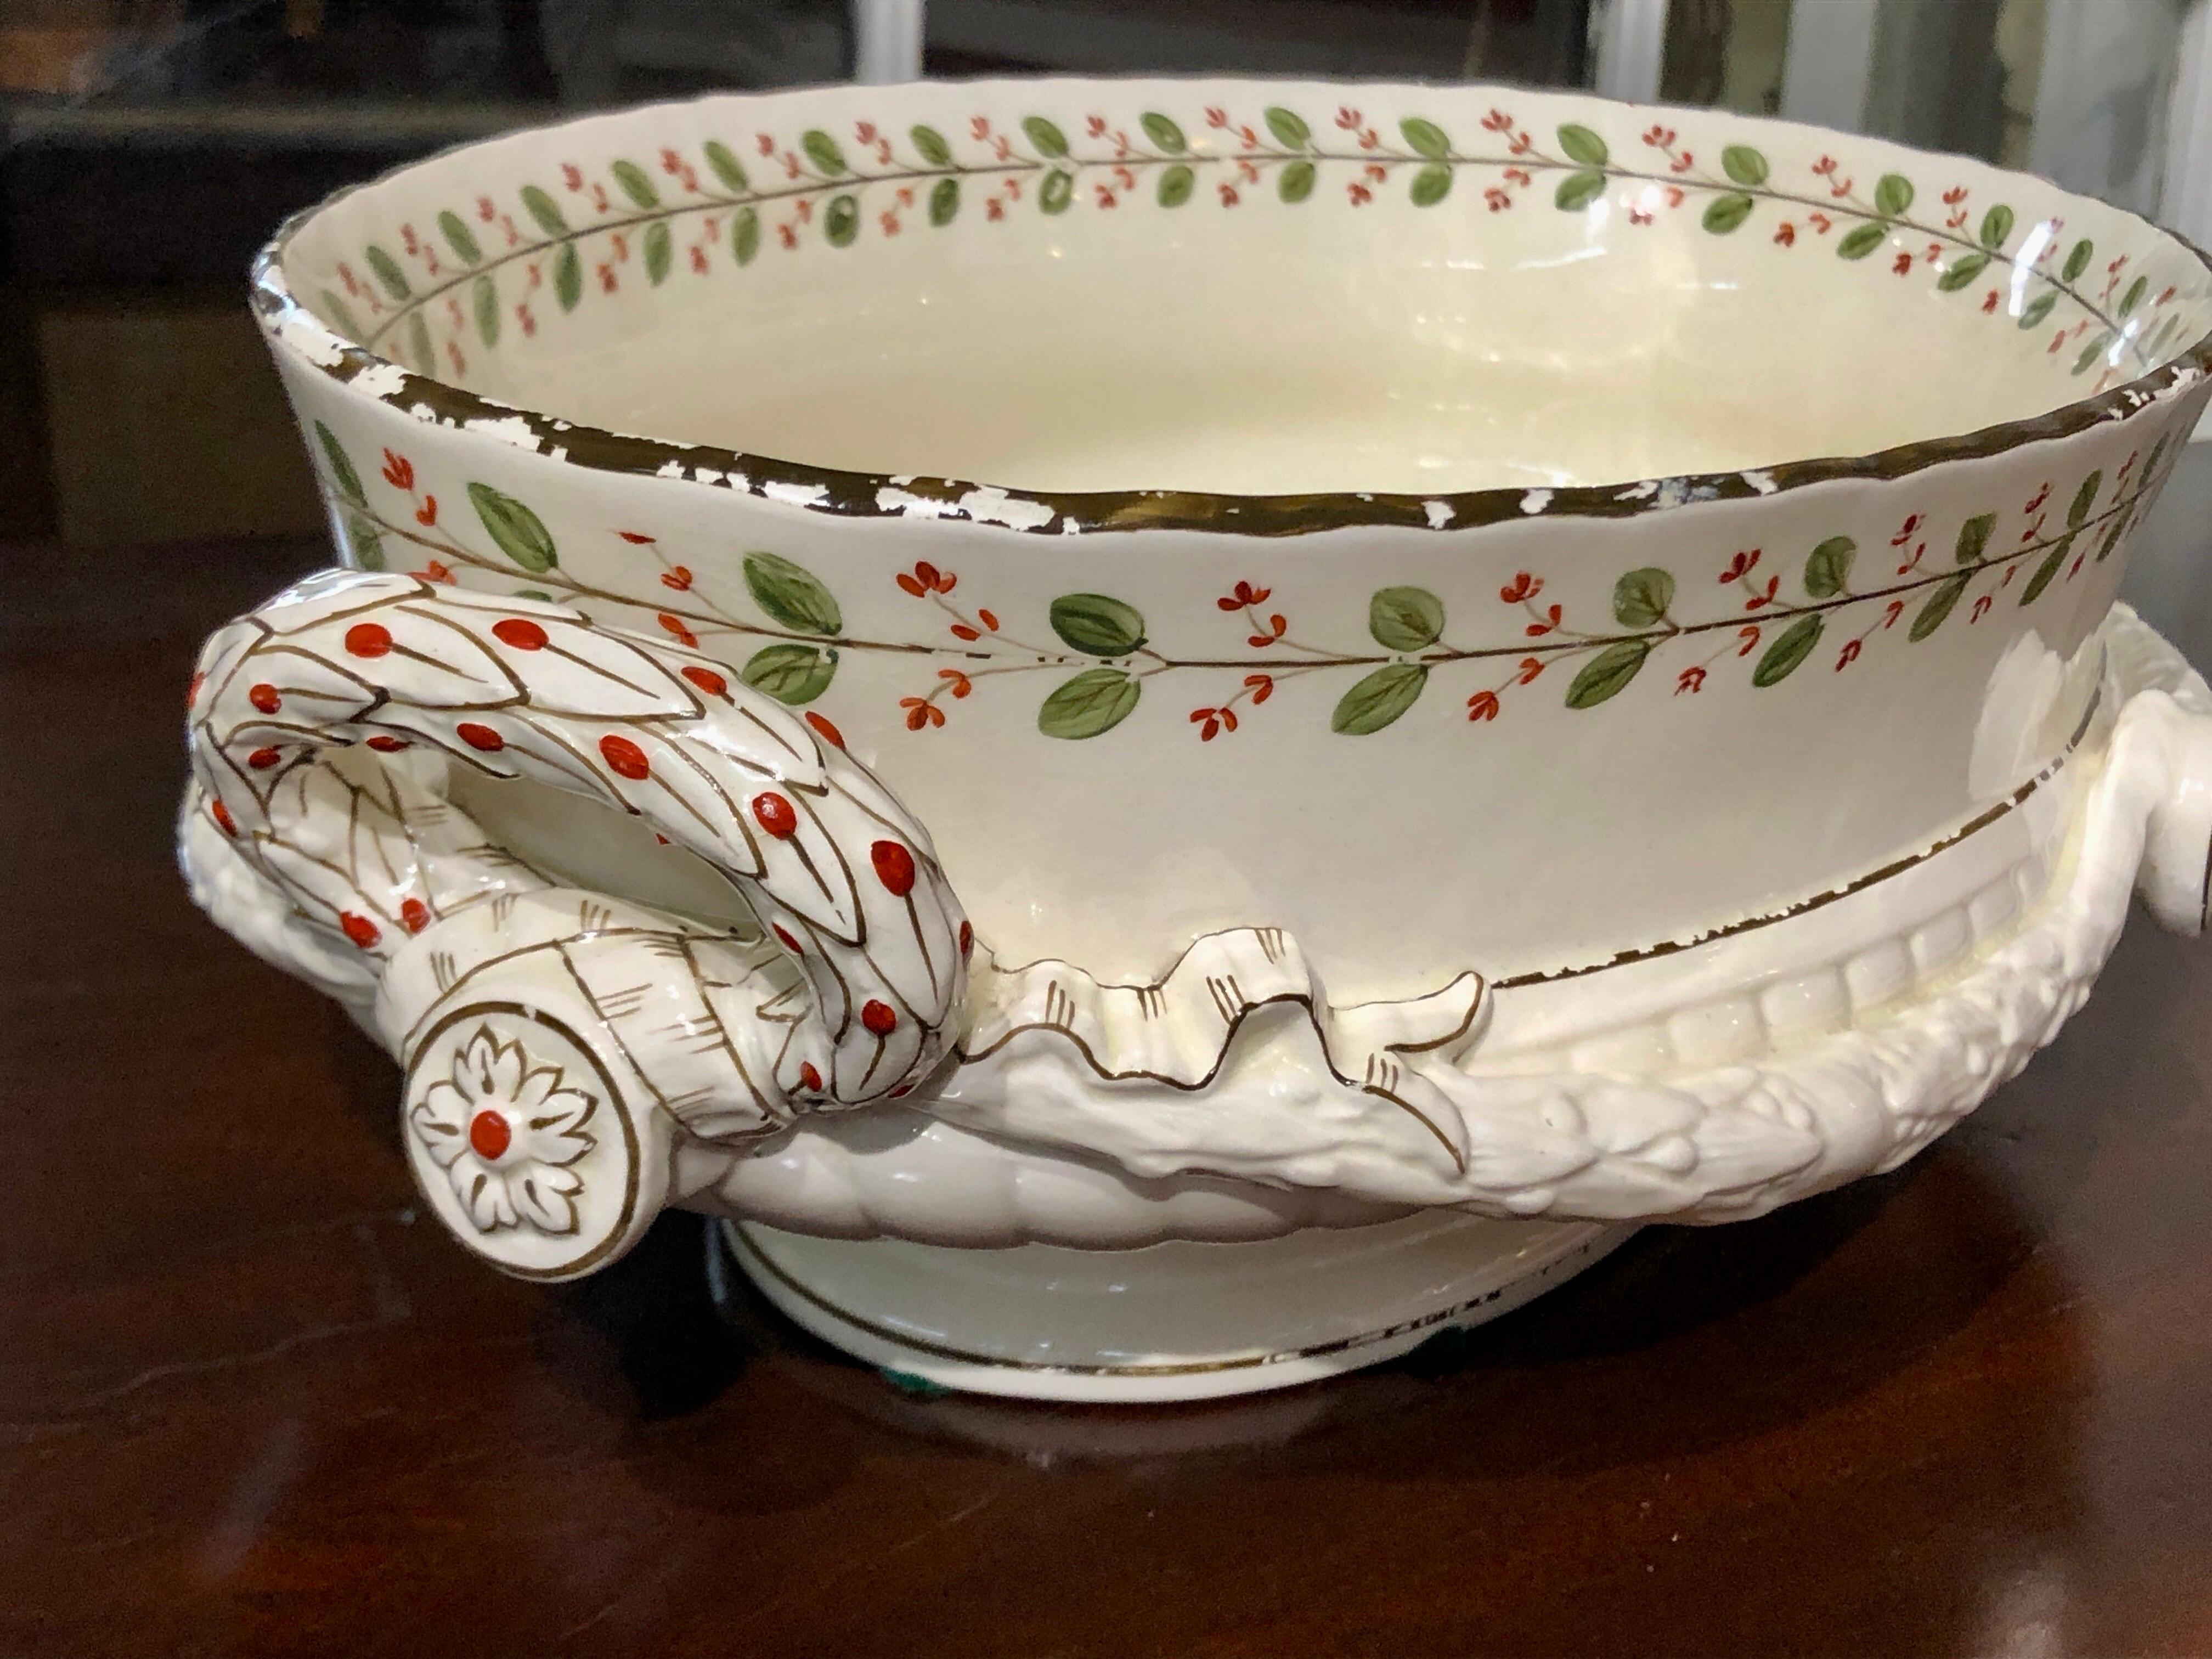 19th Century Rare Large Antique English Early 19th C. Wedgwood Queensware 'Creamware' Bowl For Sale